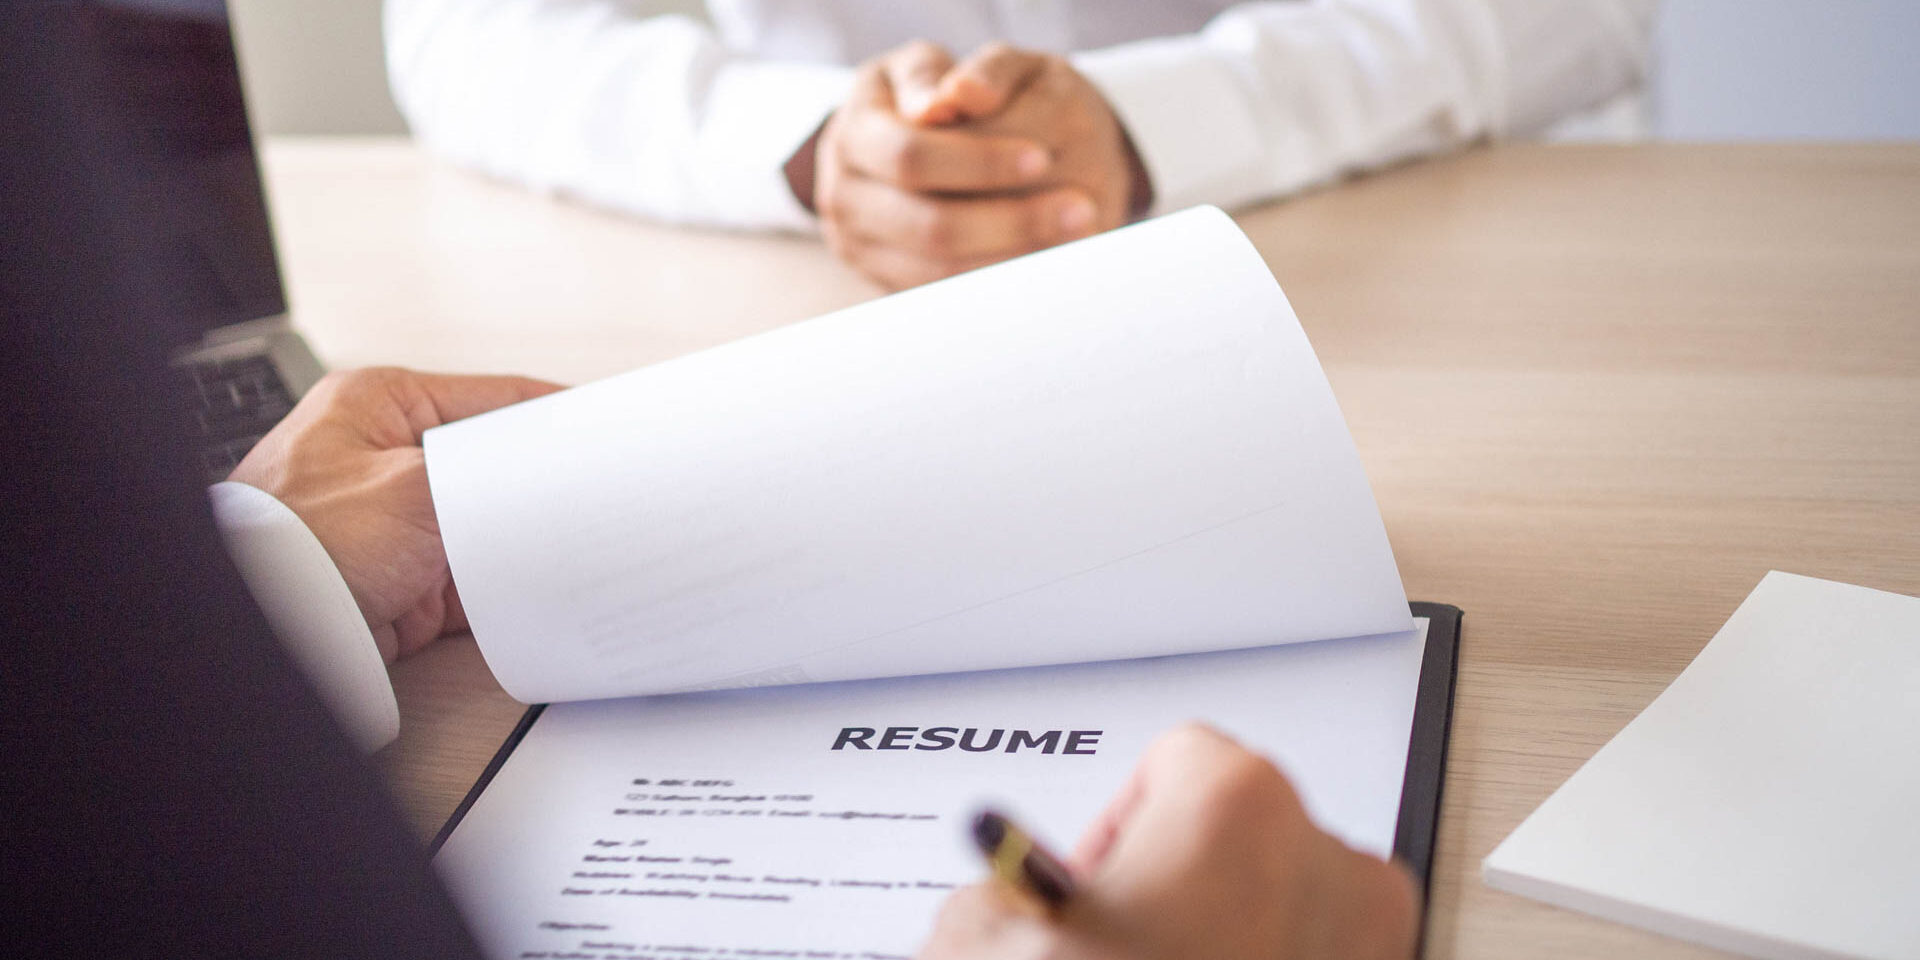 how to make a good welder resume